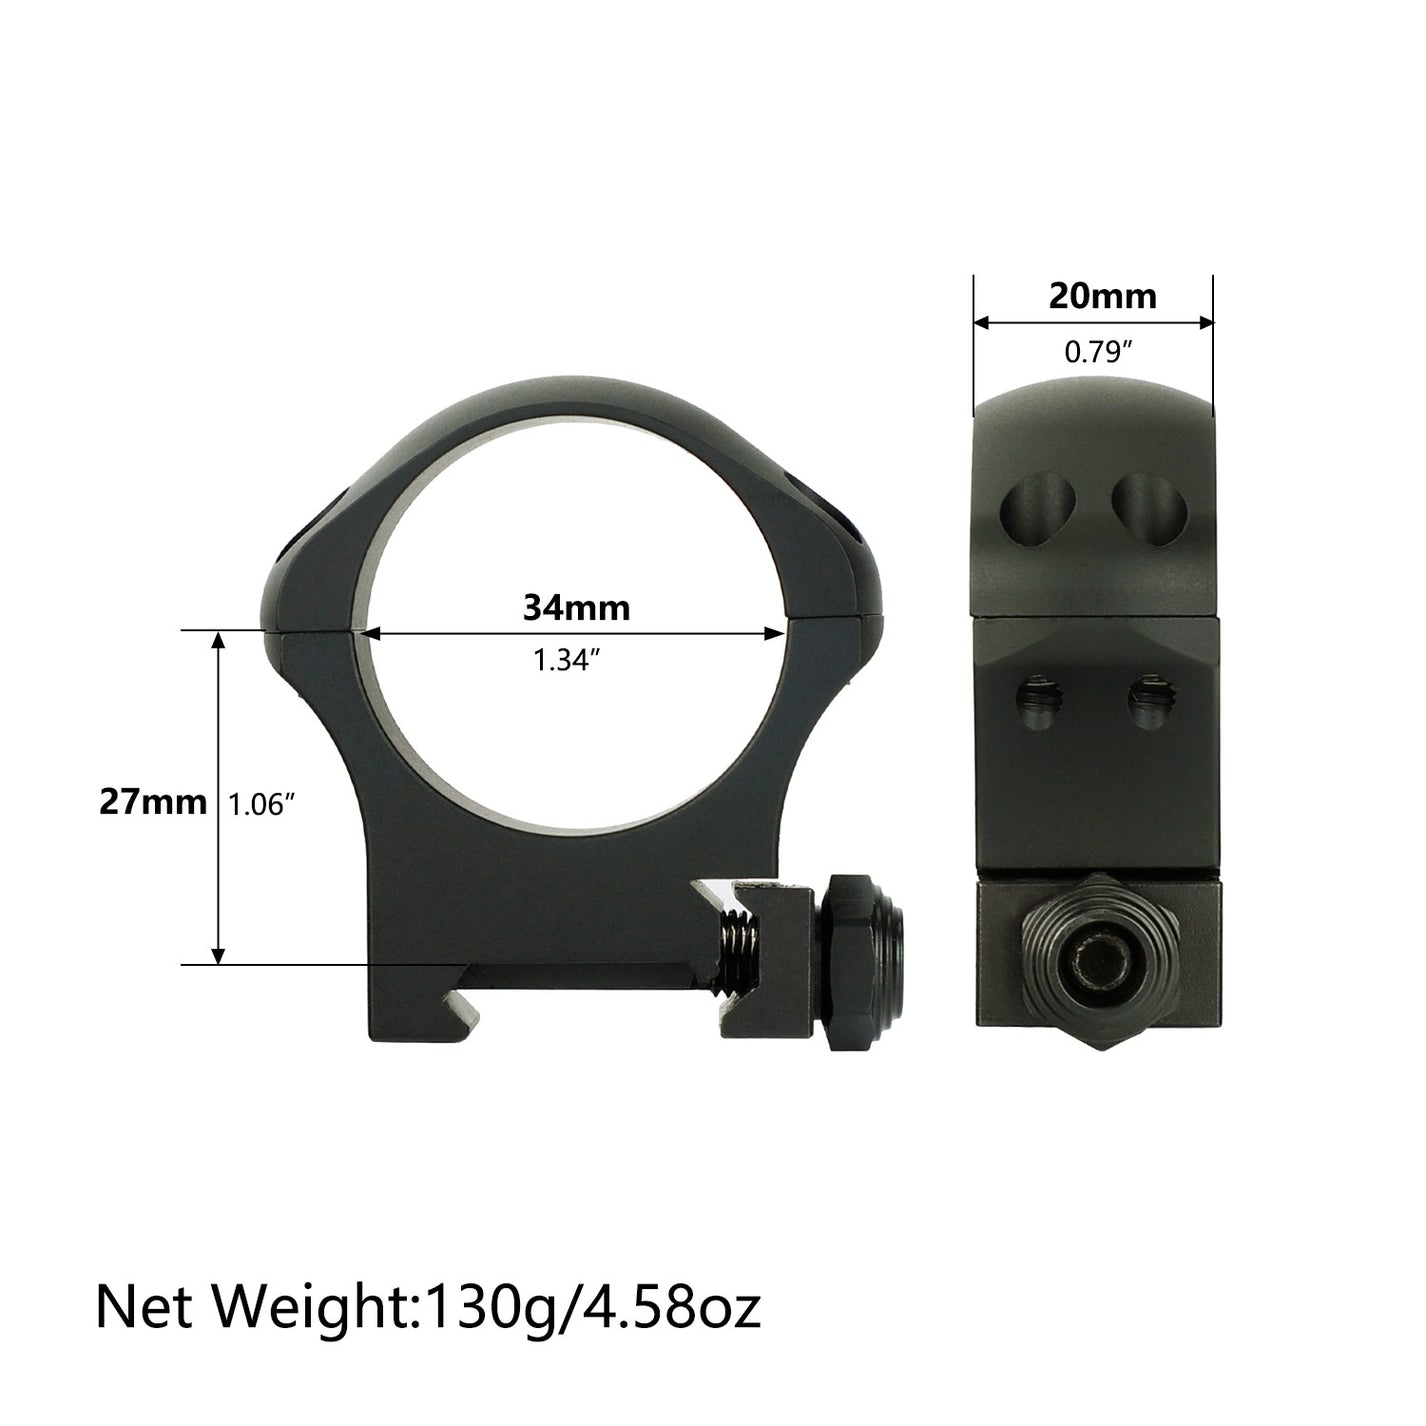 ohhunt® Pro 7075 Aluminum 34mm Scope Rings for Picatinny Rail - High Med Low Profile